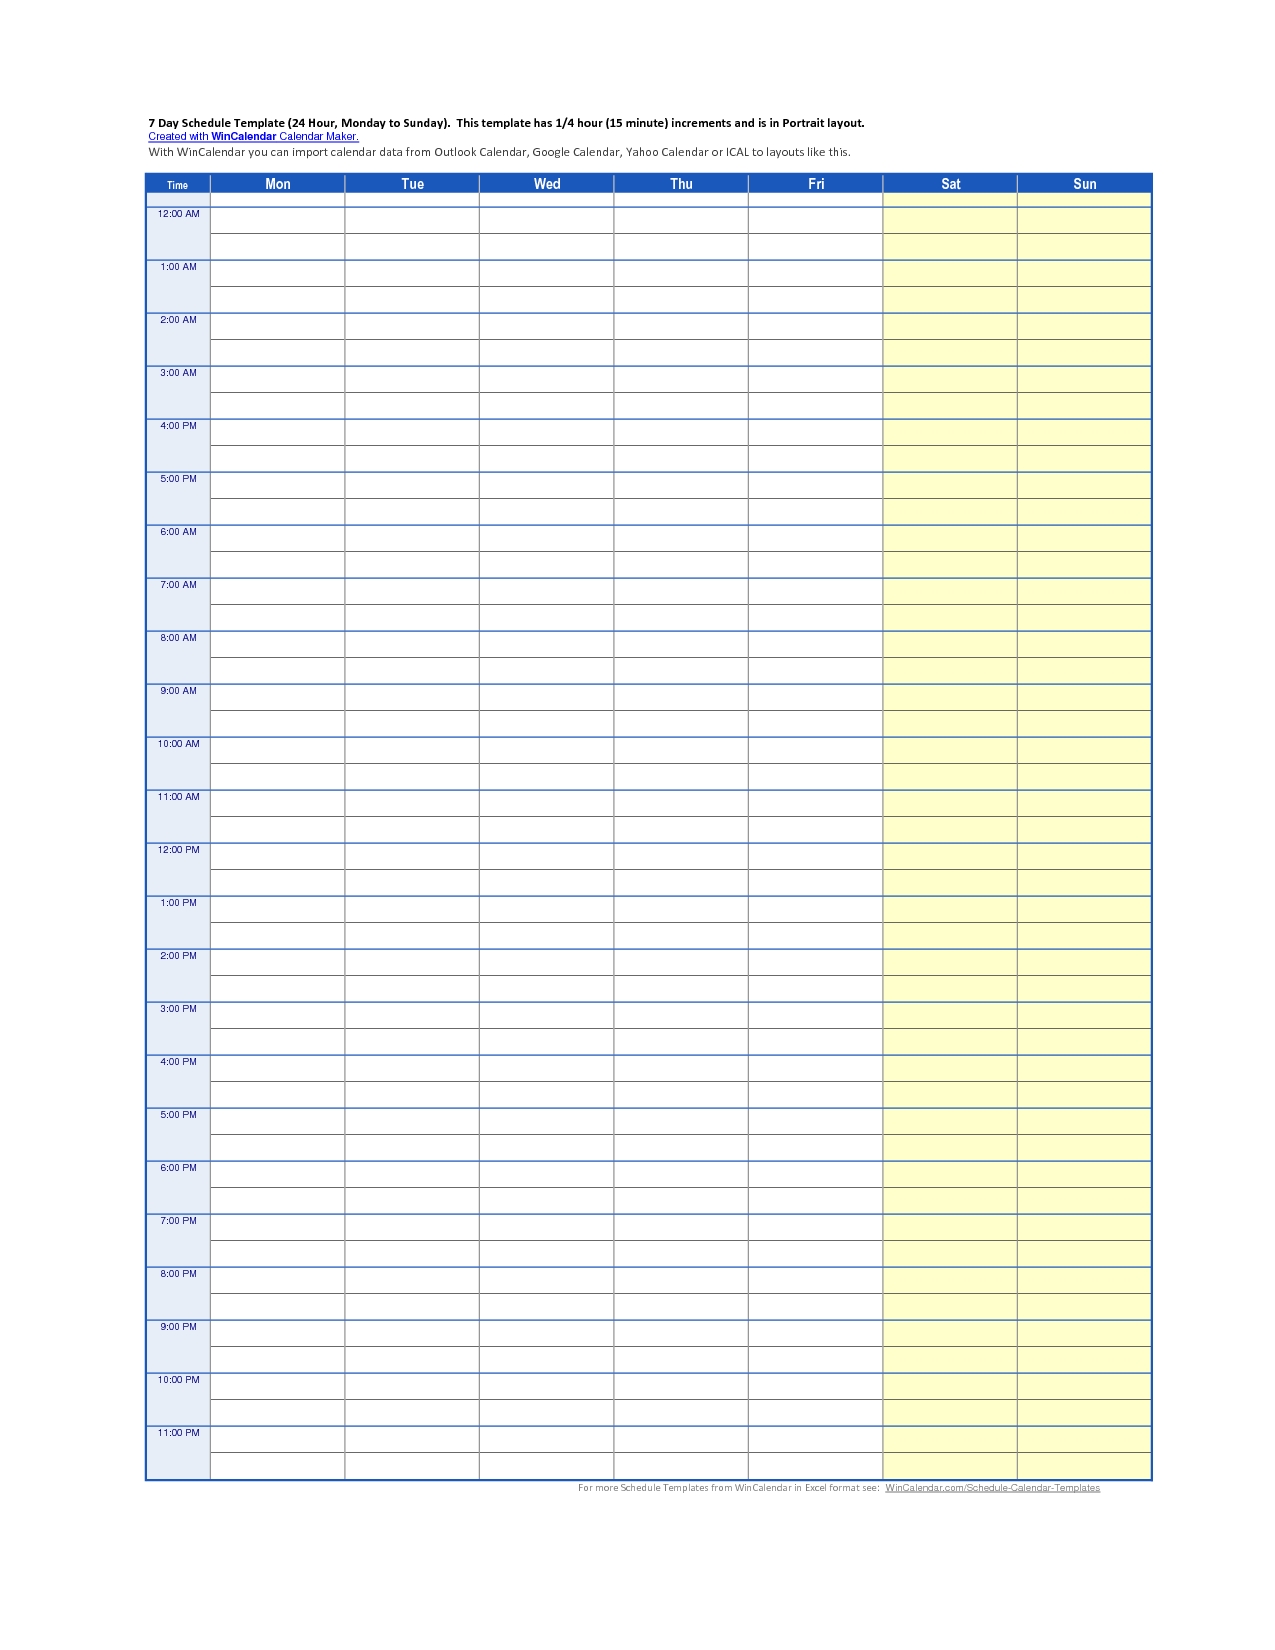 24 Hour Day Schedule Template | Genny | Schedule Templates, Daily in 24 Hour Daily Agenda Printable